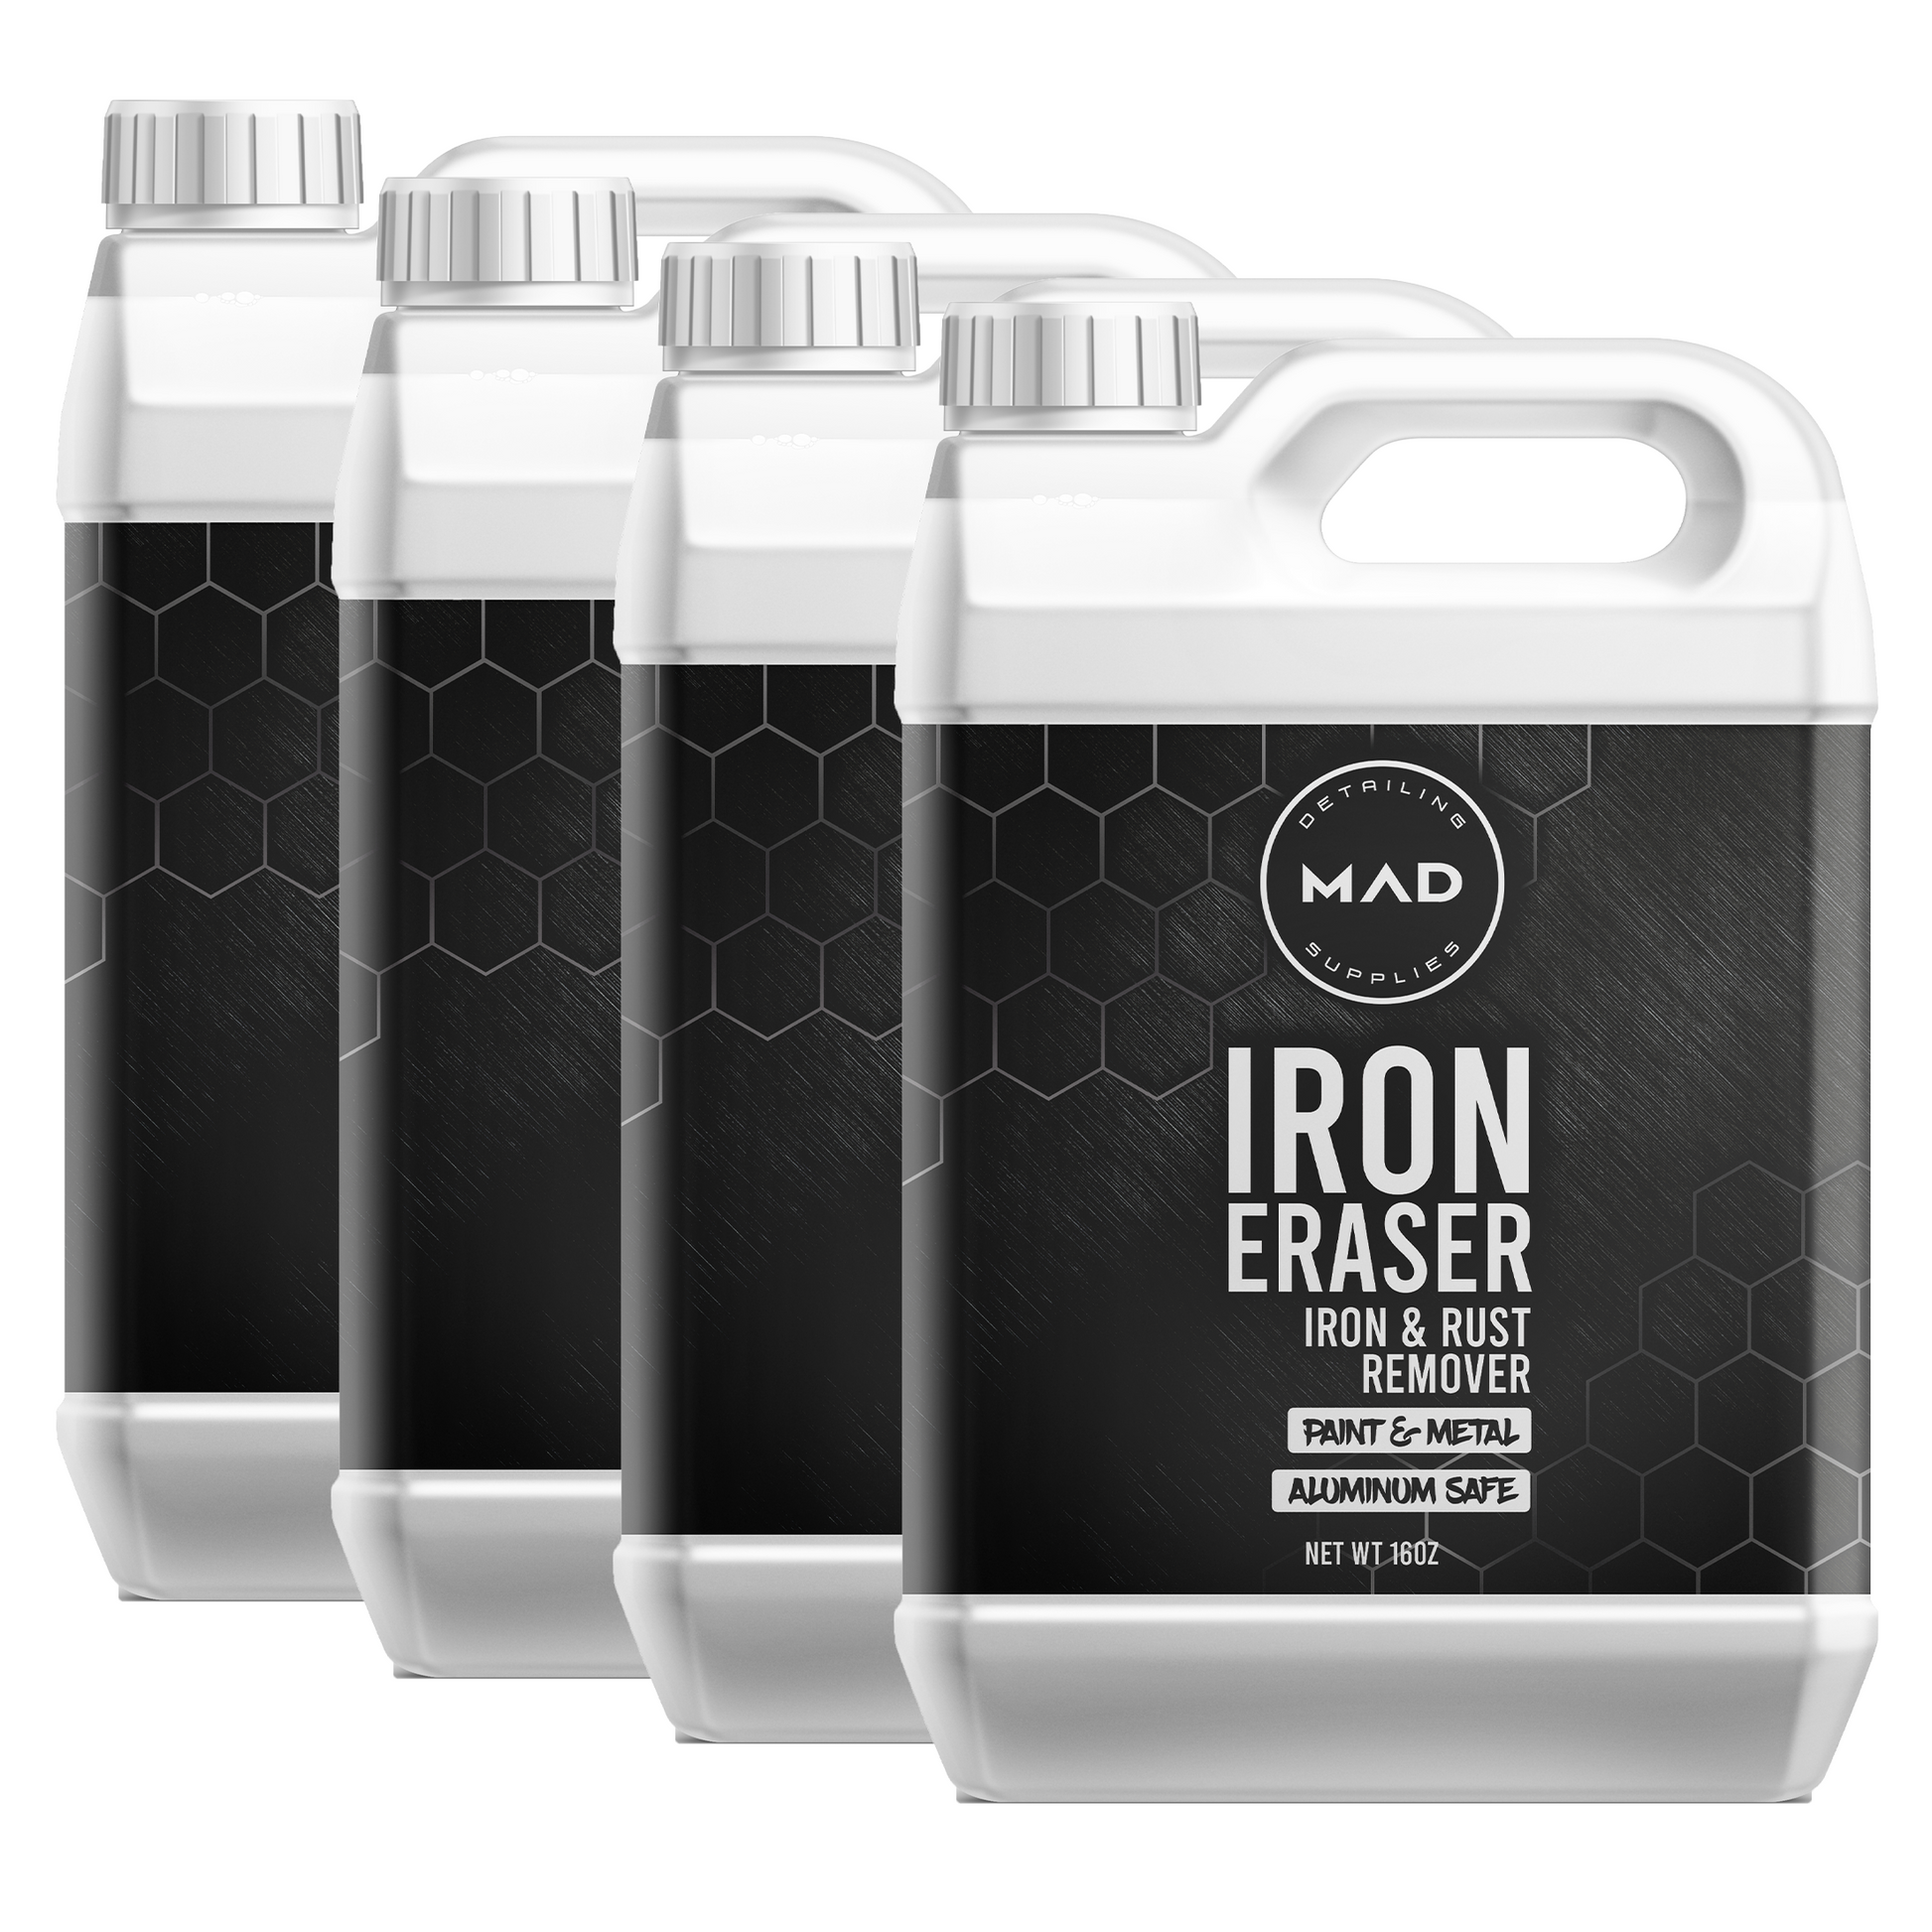 Tohuu Iron Remover Car Detailing Rust Reformer Spray Metal Cleaner And  Conditioner Heavy Duty Corrosion Inhibitor Exterior Care Products. rational  